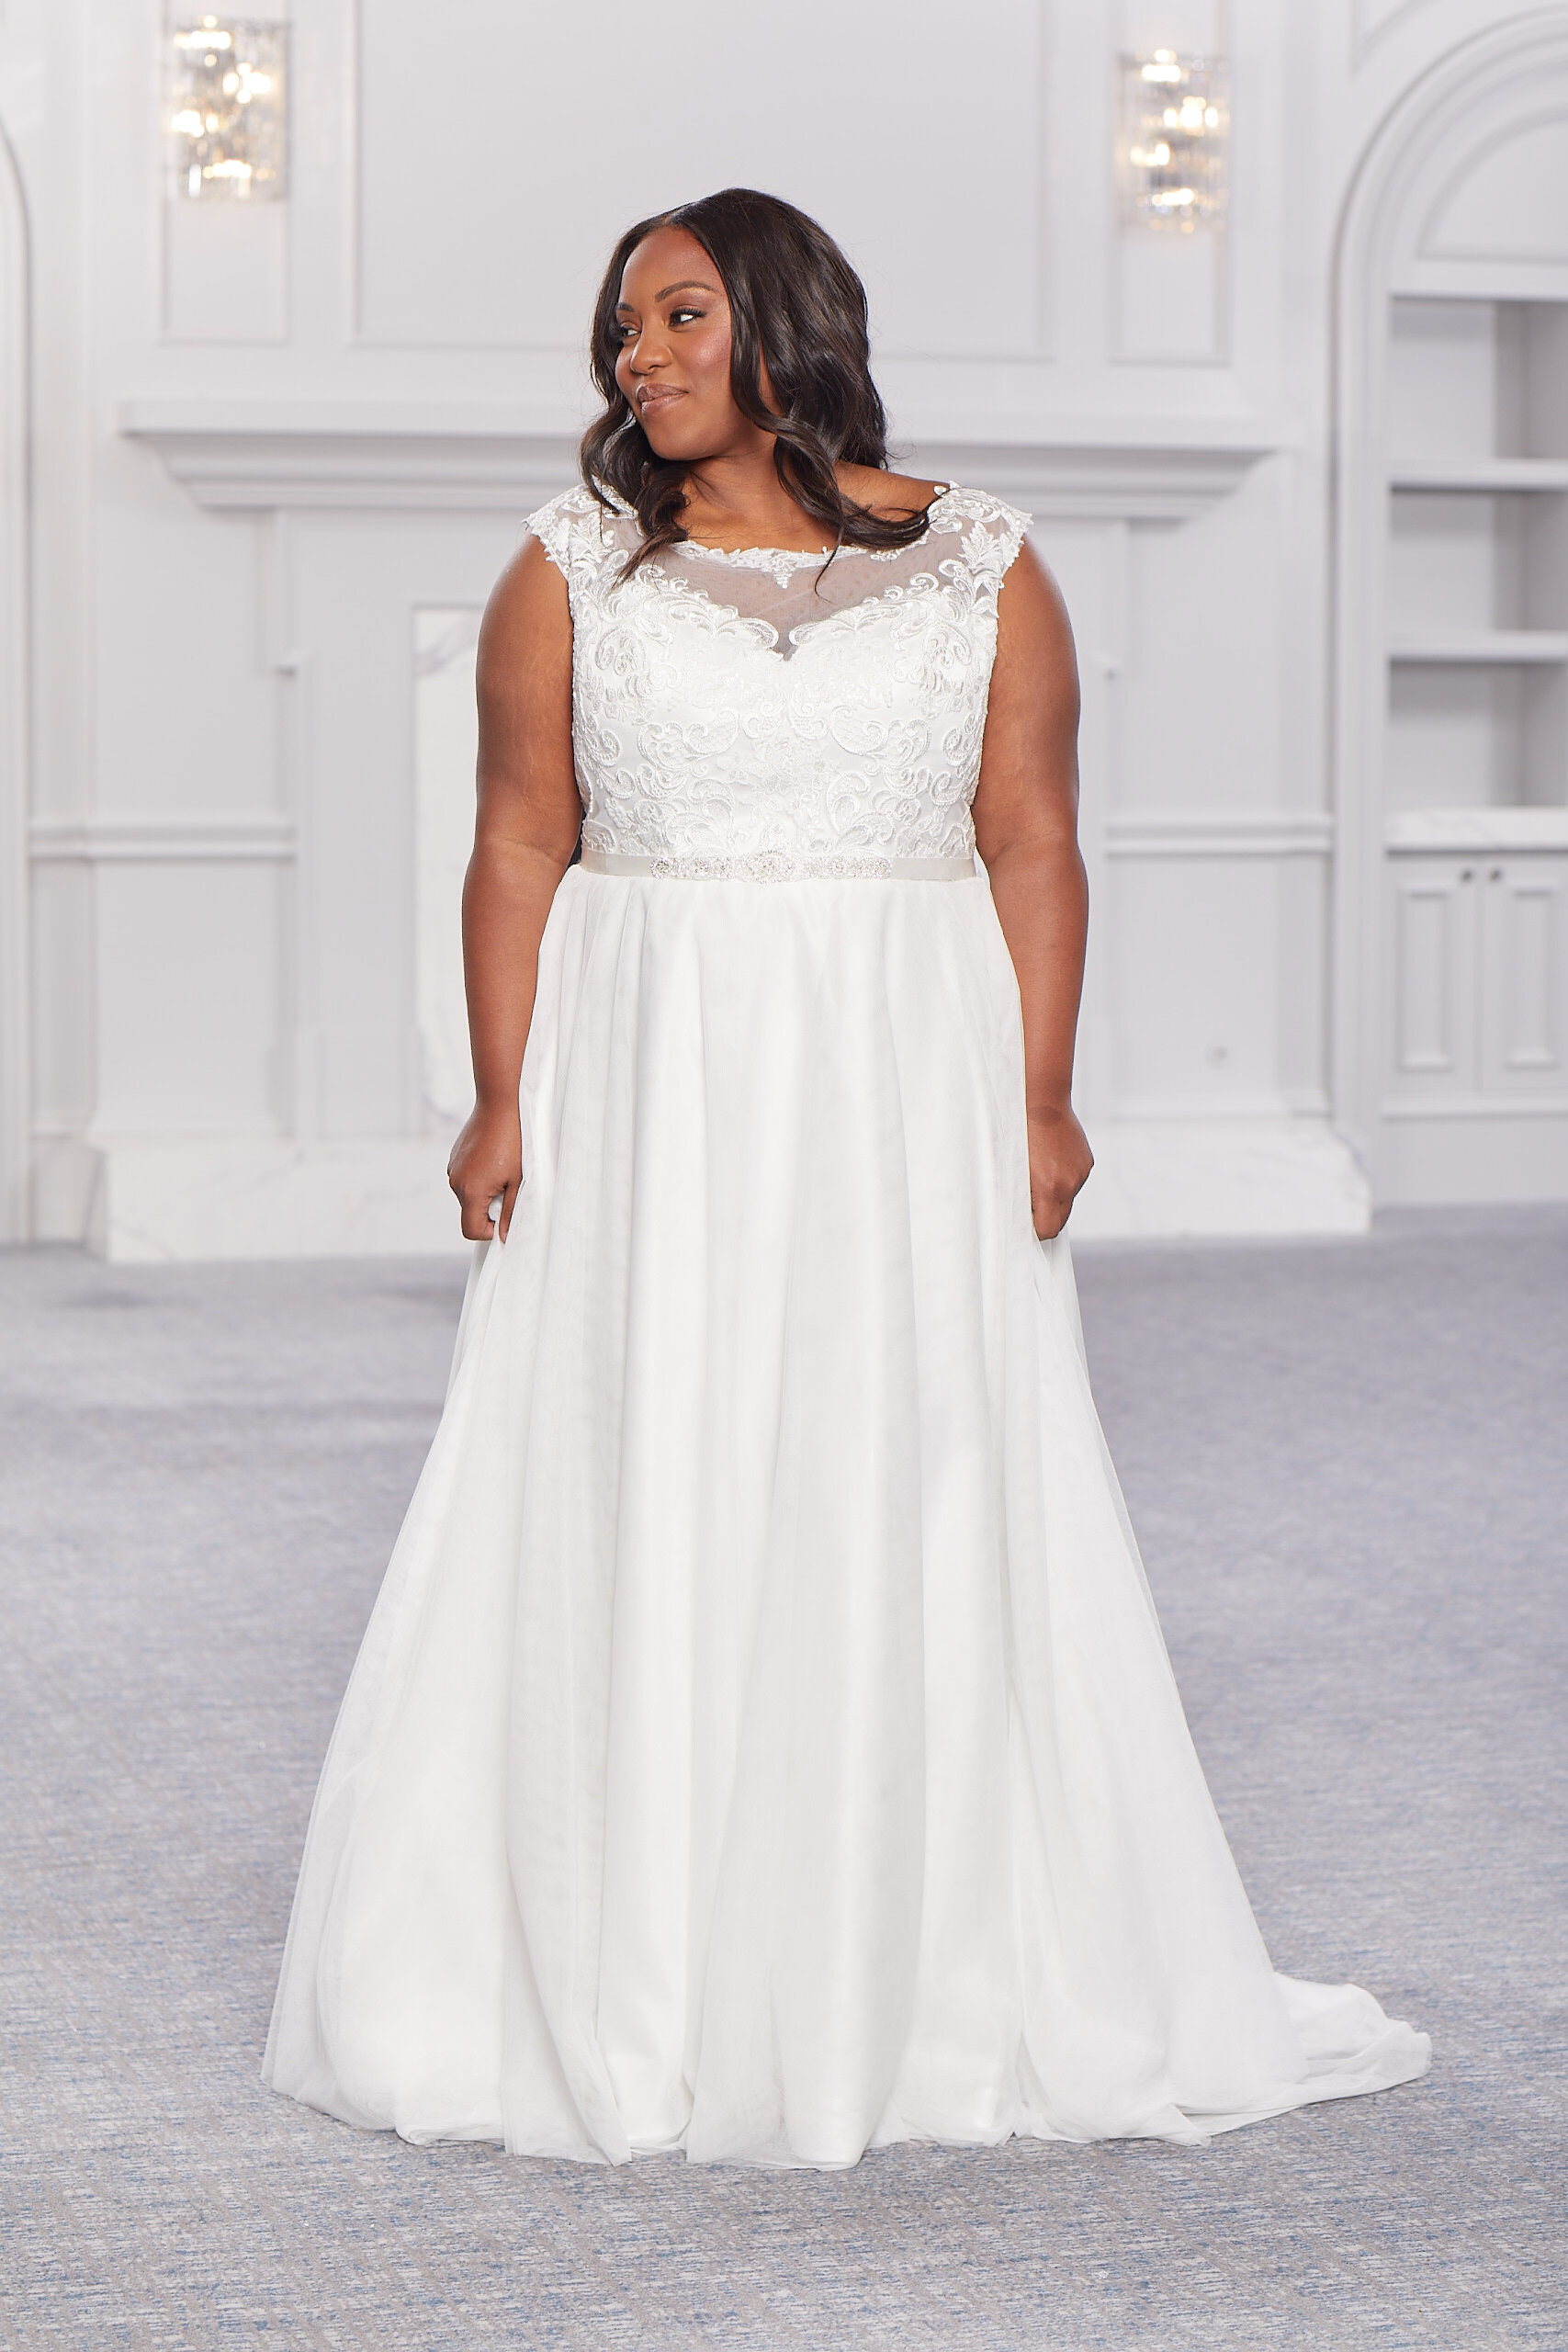 Brides-by-Young-Plus-Size-Bridal-Curvy-Wedding-Dress-New-Jersey-Indiana-Chicago-Illinois-ARIEL_1677.jpg